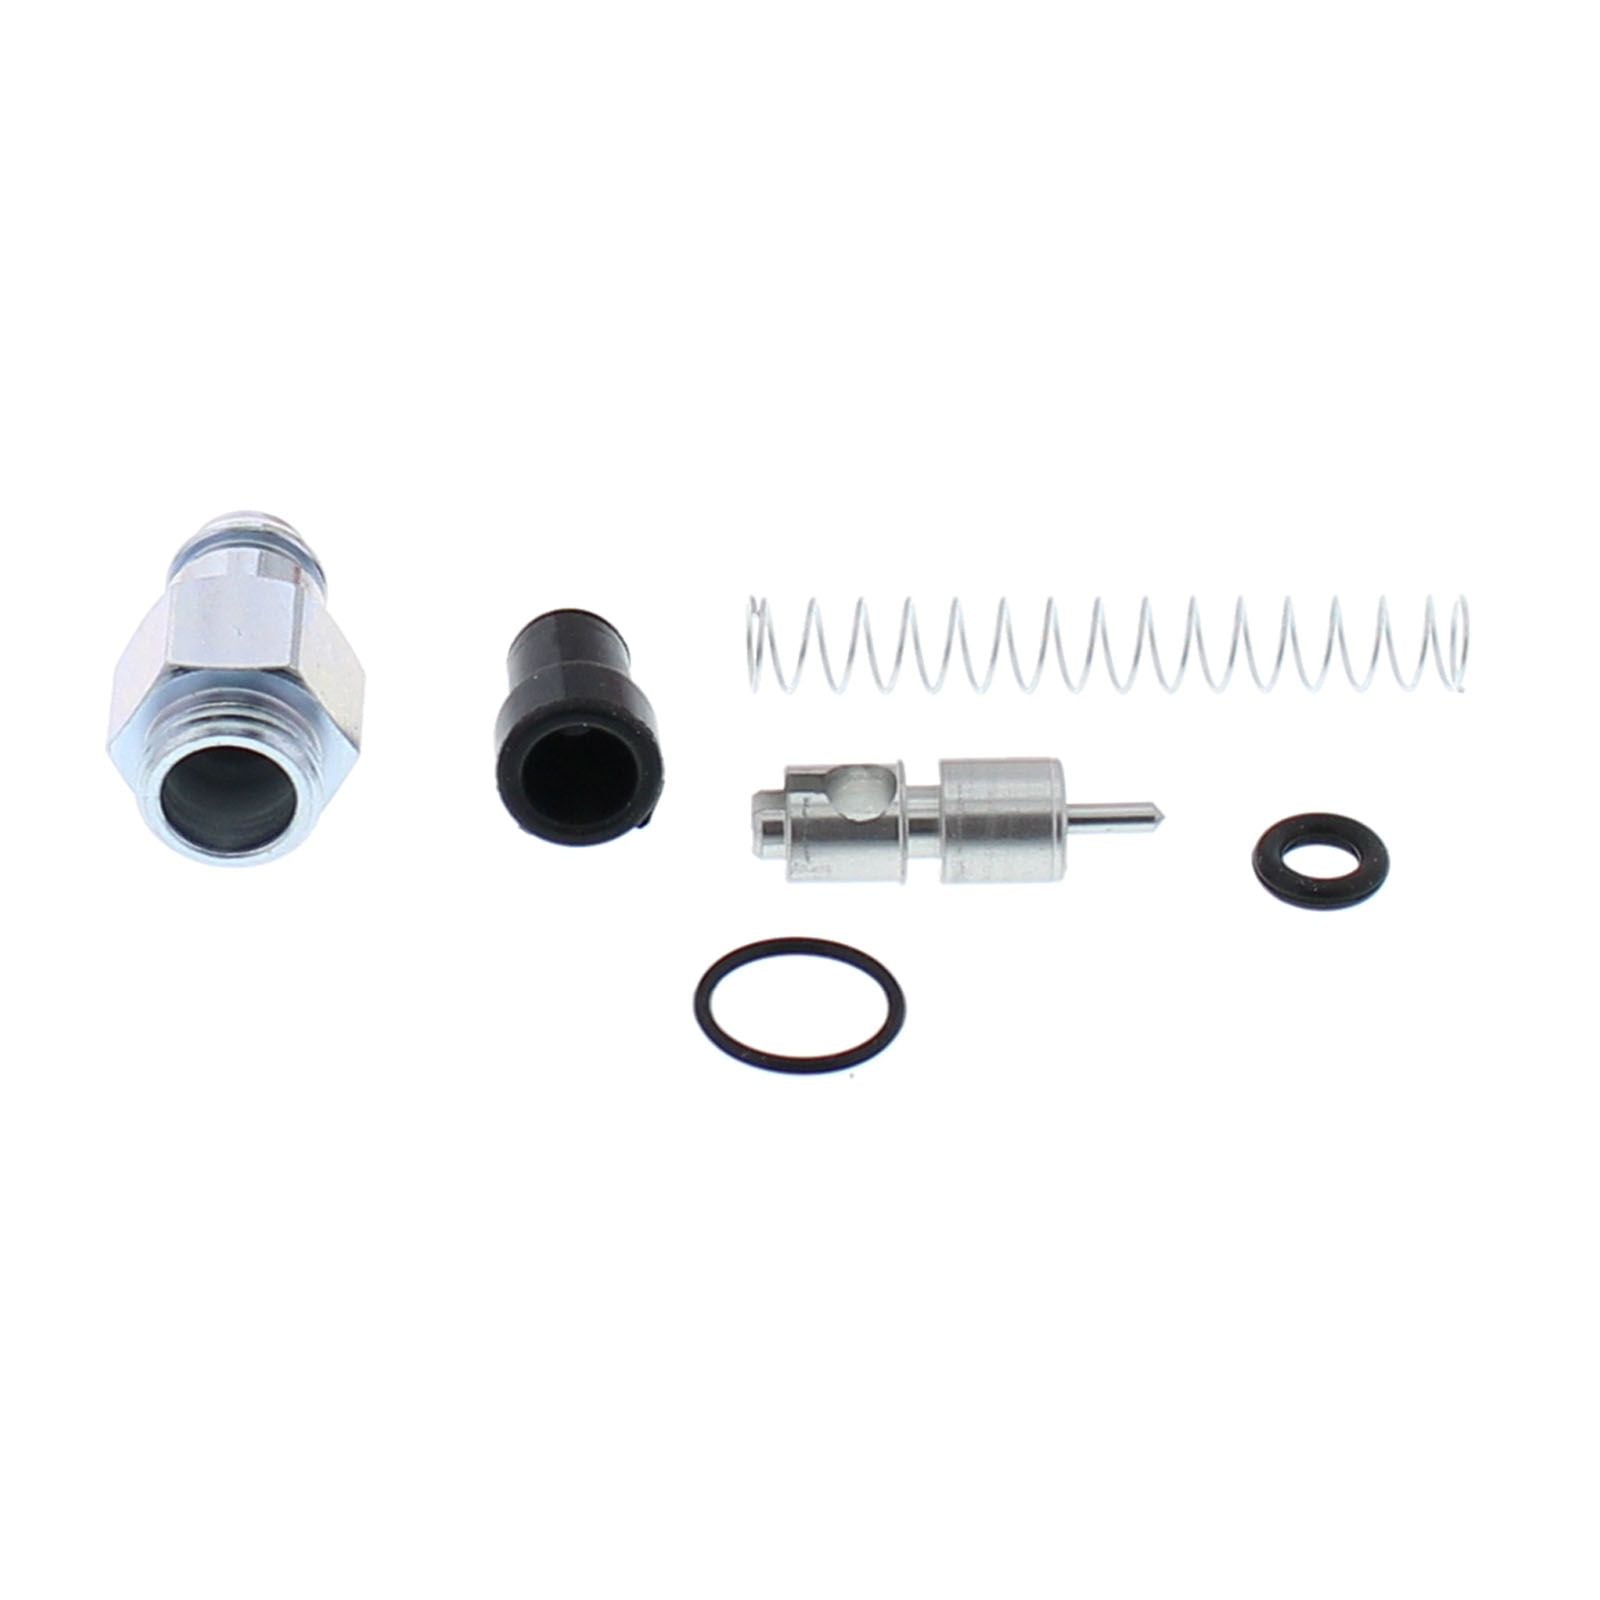 New ALL BALLS CHOKE PLUNGER KIT - INC ALL REQUIRED REBUILD PARTS AB461047